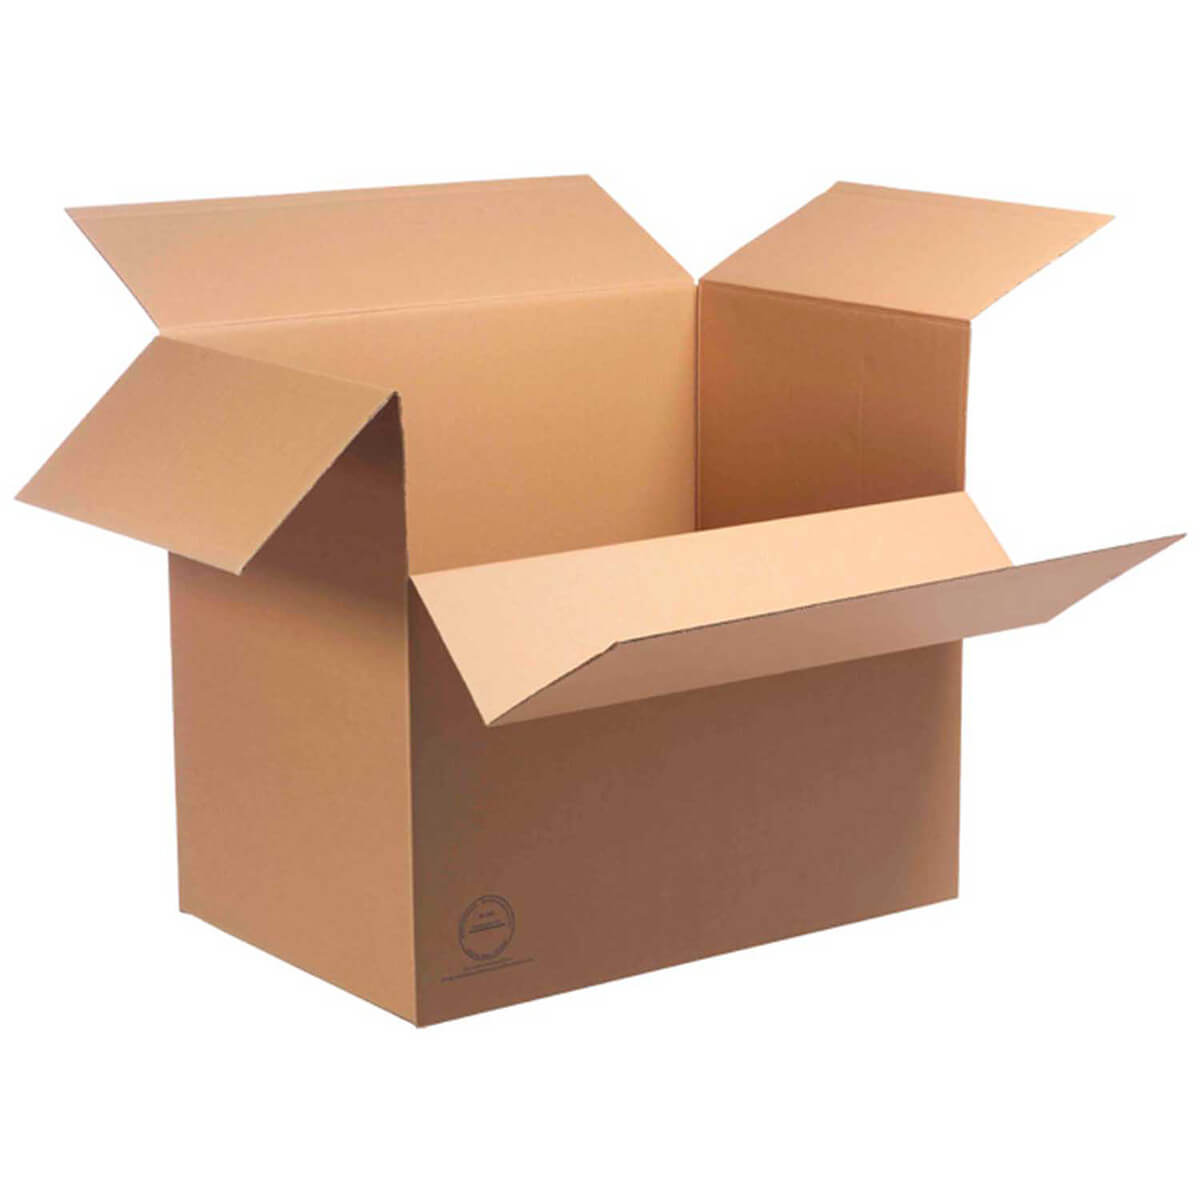 Double wall cardboard container 1180 x 780 x 1070 mm